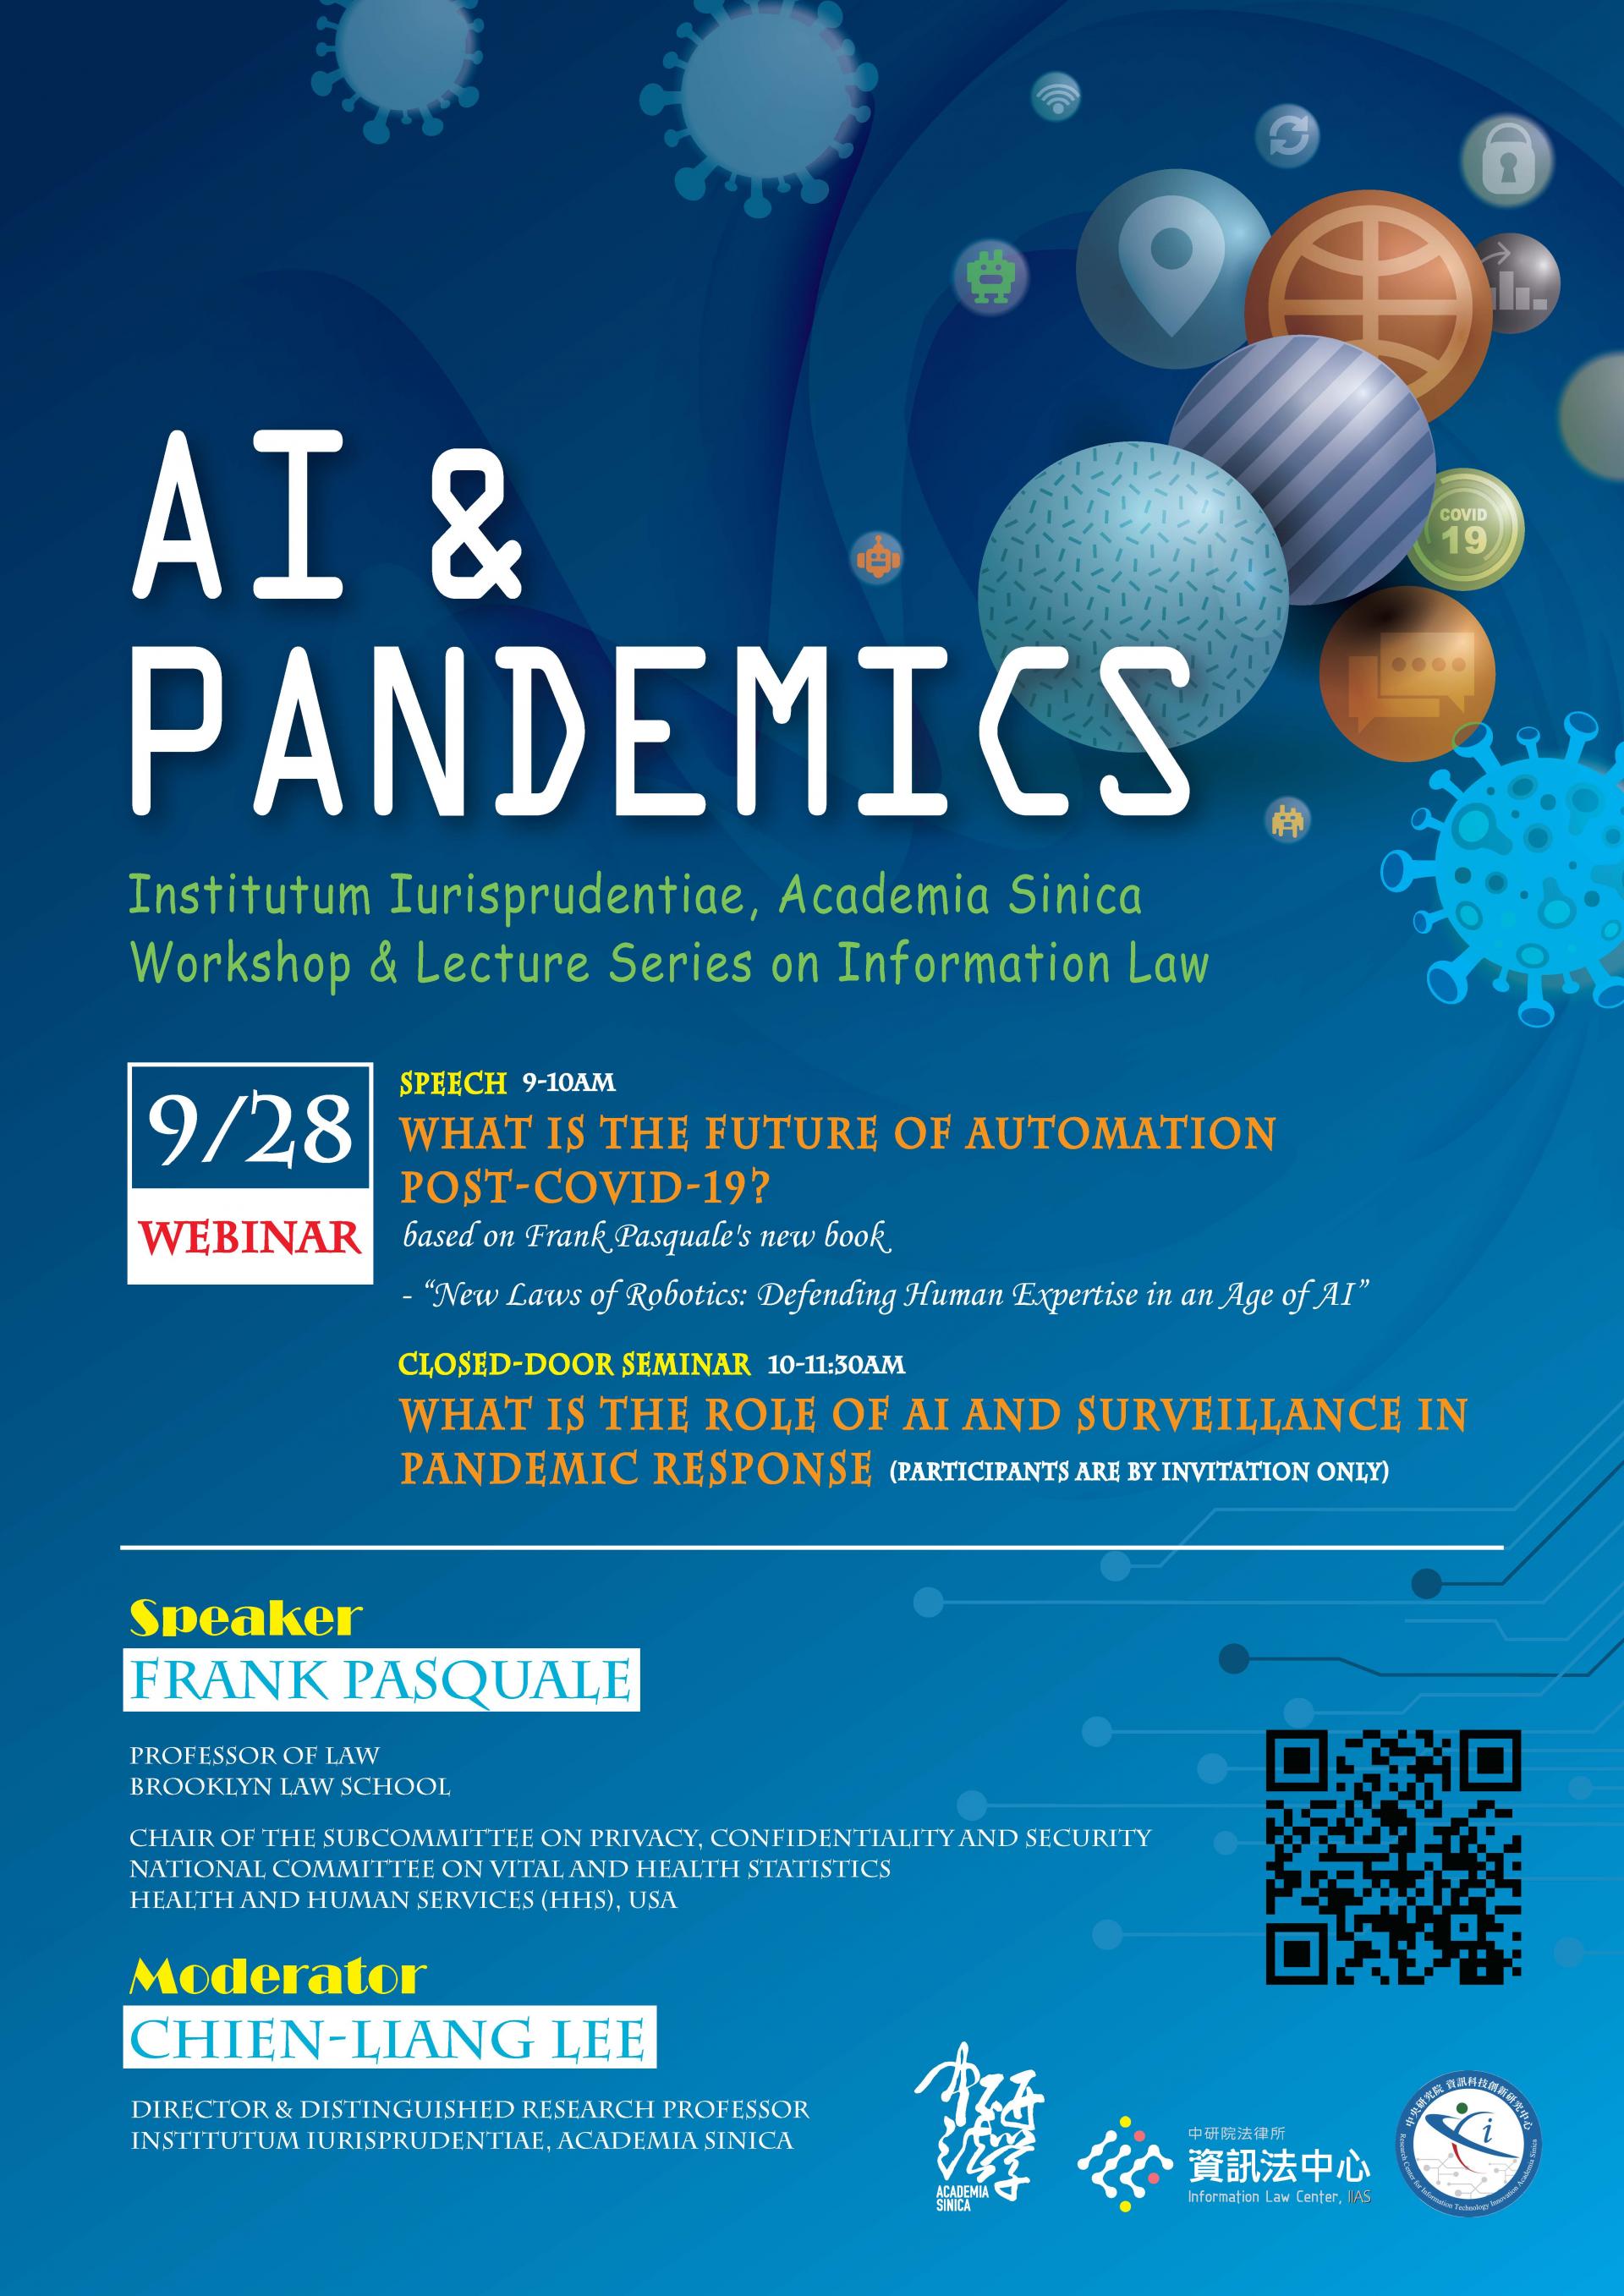 AI & PANDEMICS - Workshop & Lecture Series on Information Law with Frank Pasquale-poster